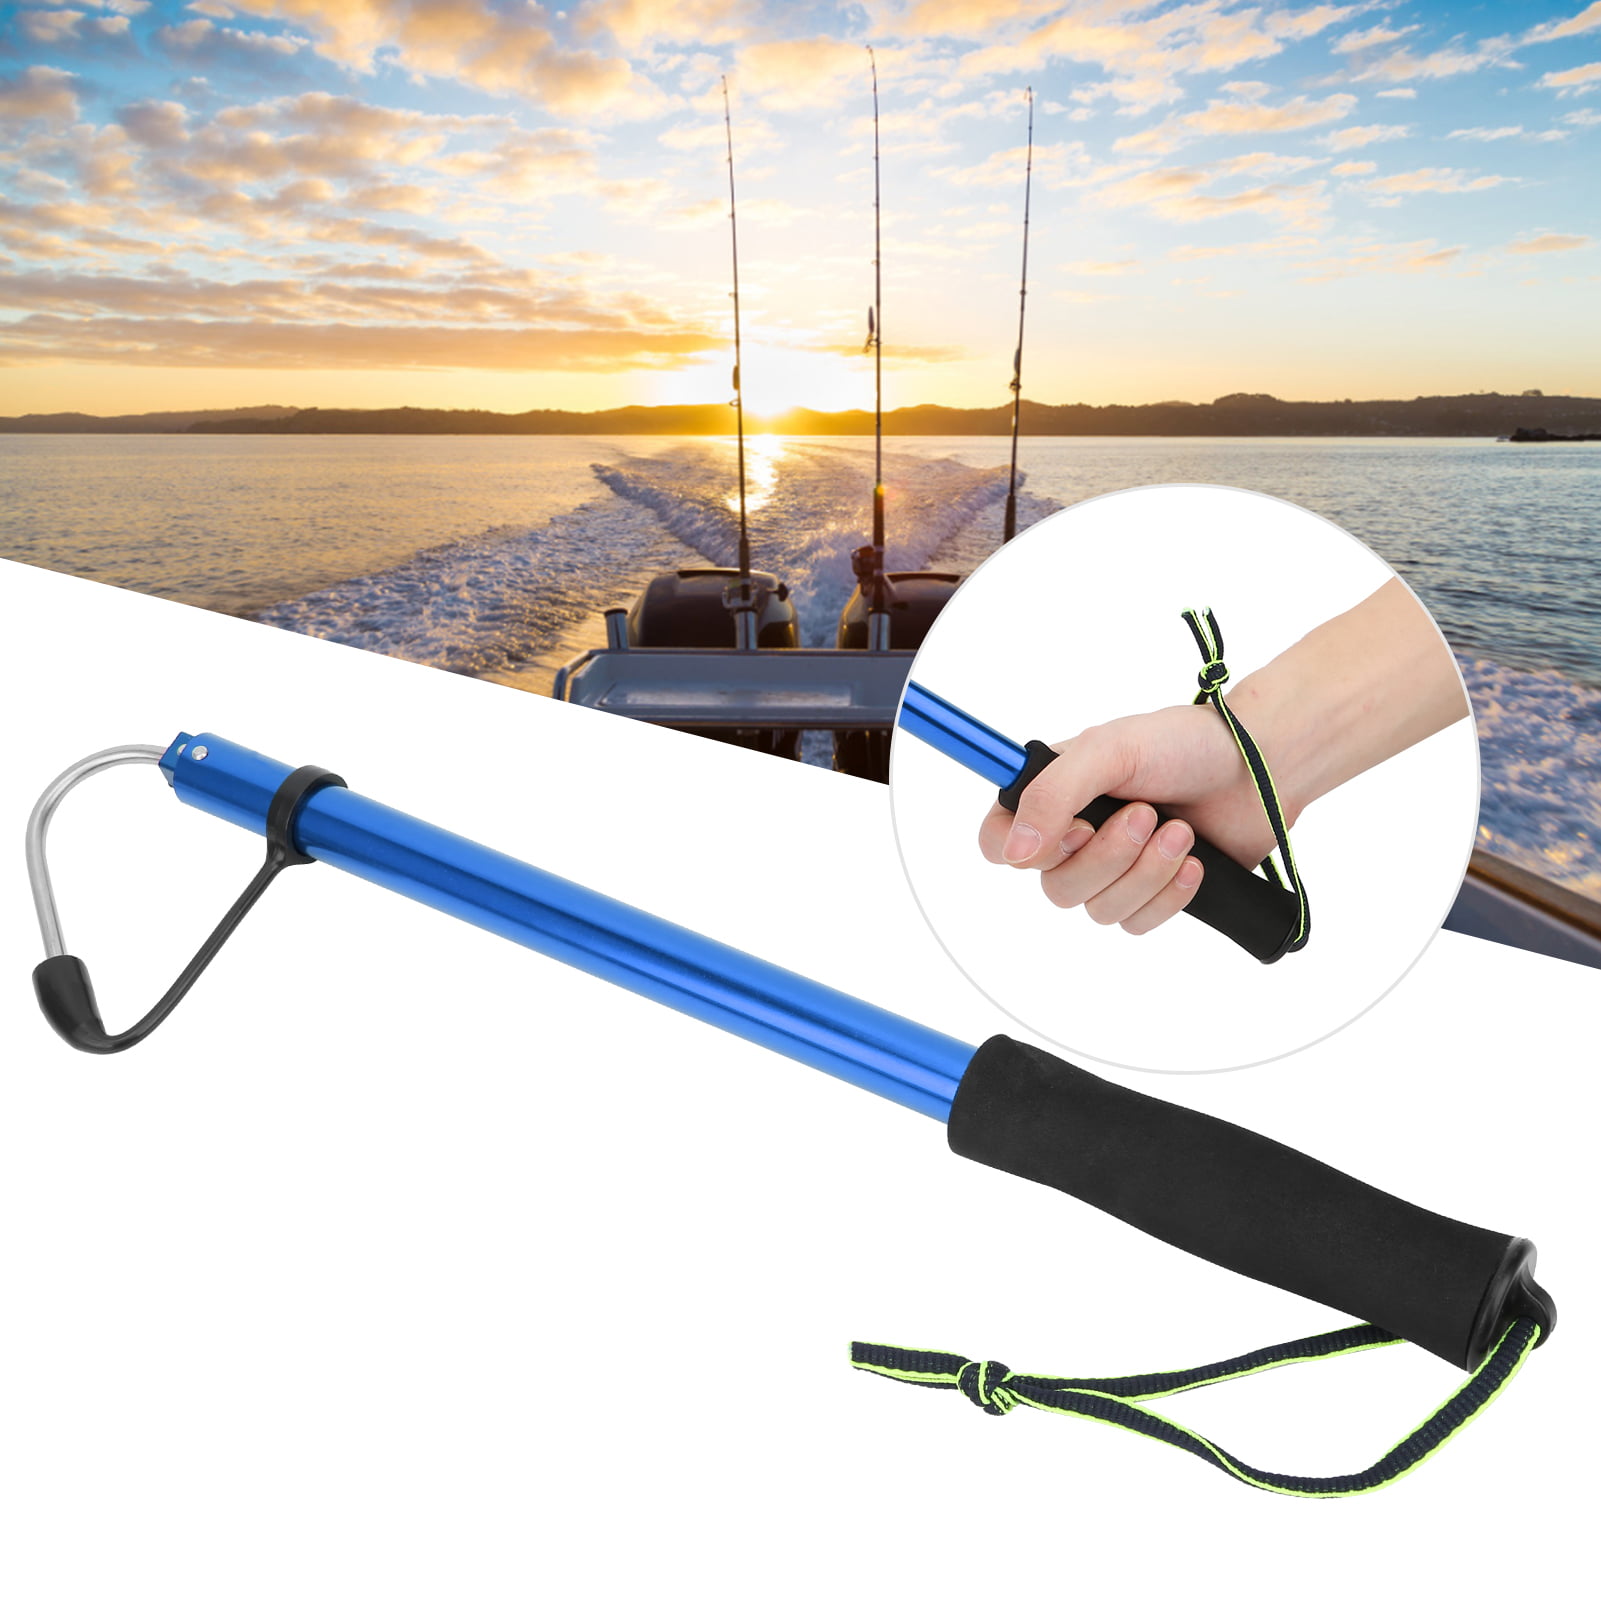 Octpeak Stainless Steel Fishing Hook,Portable Telescopic Sea Fishing Gaff  Aluminum Alloy Pole with Stainless Steel Spear Hook 